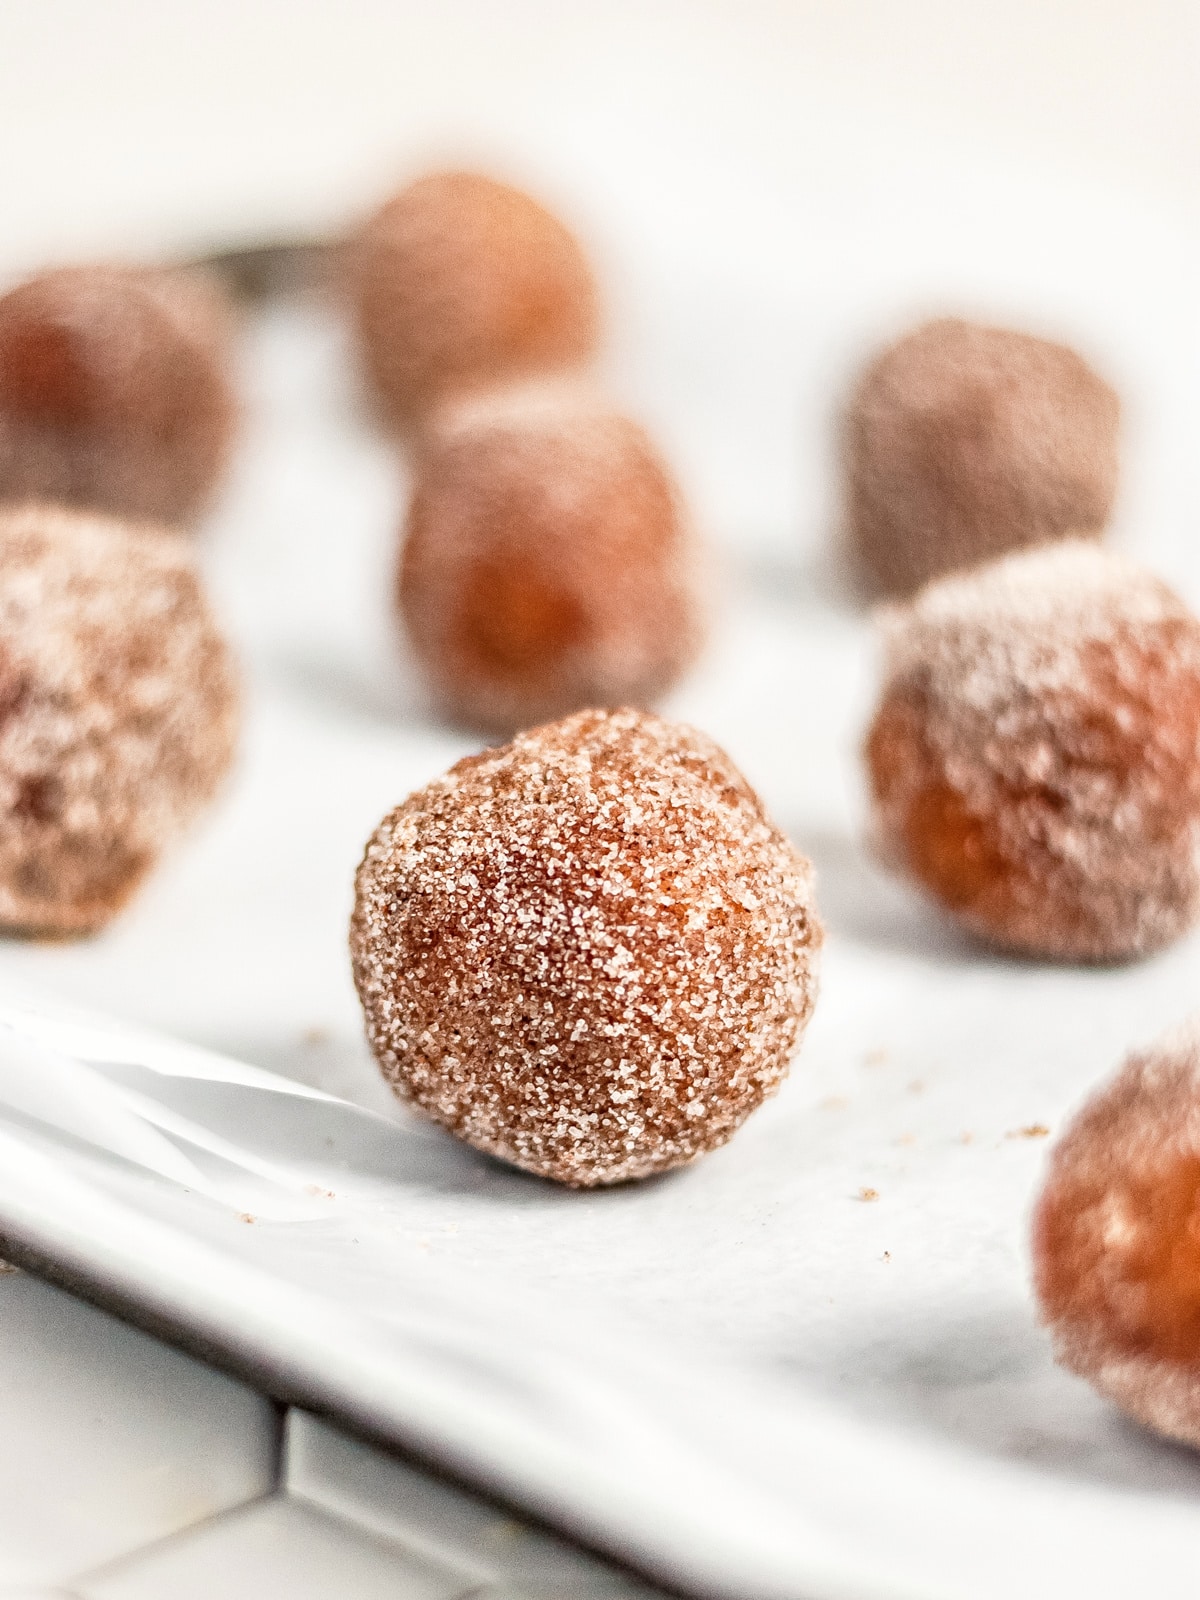 Coated donut holes dry on a plate.